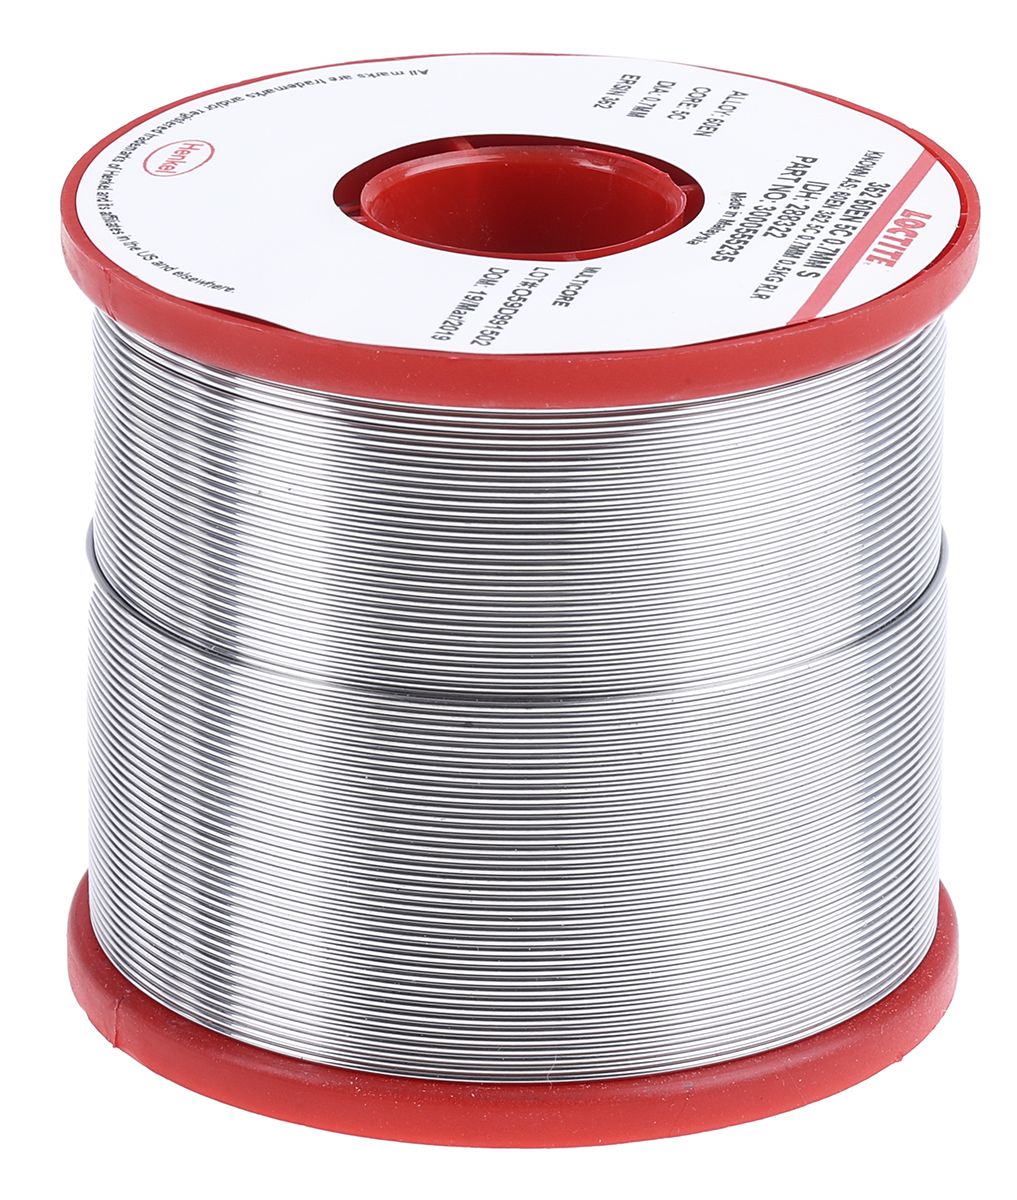 Multicore Wire, 0.7mm Lead solder, 183 → 188°C Melting Point